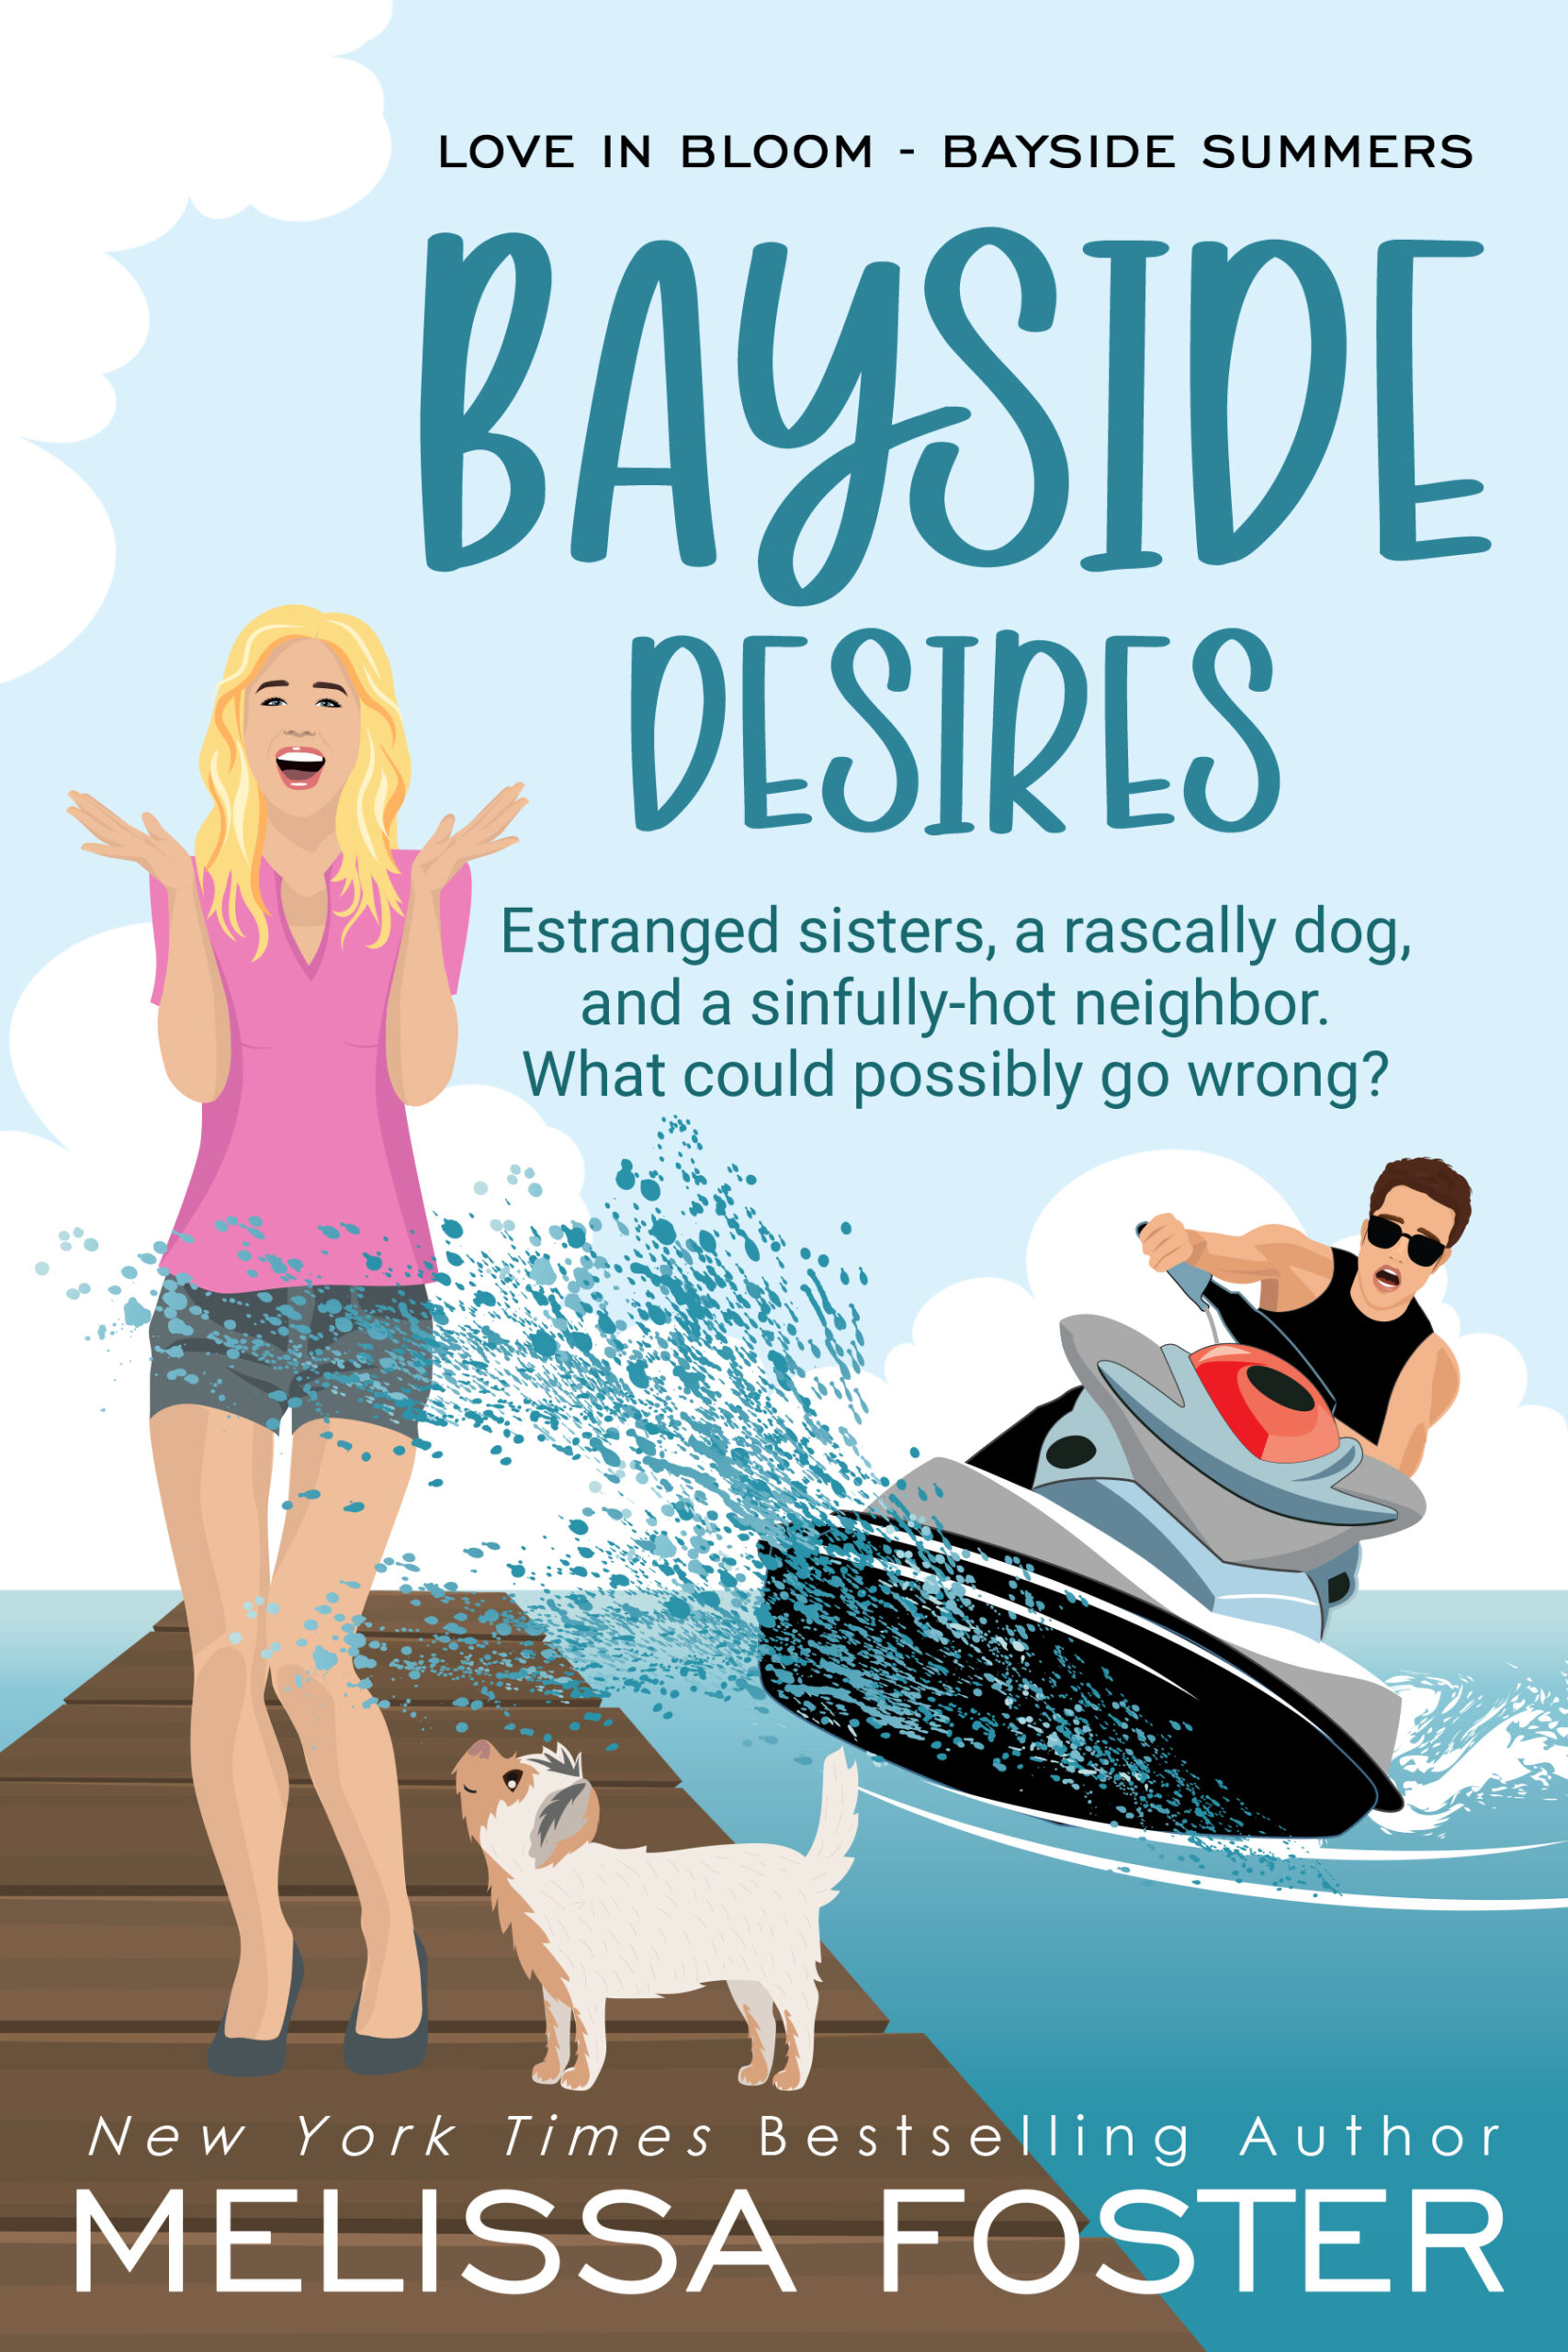 Bayside Desires - Special Edition by Melissa Foster